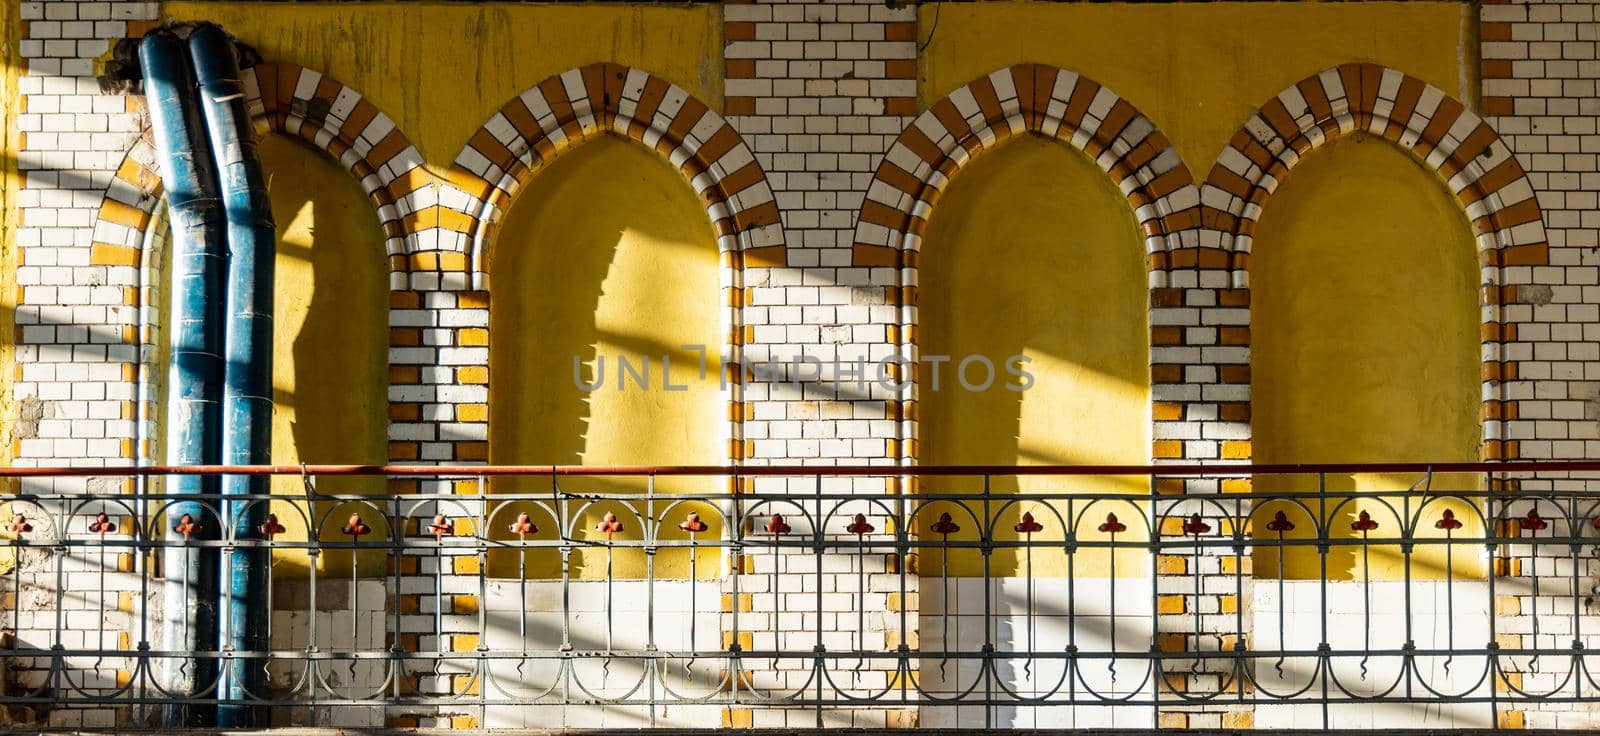 Arcs made of red and white tiles on yellow wall at balcony inside pumping station